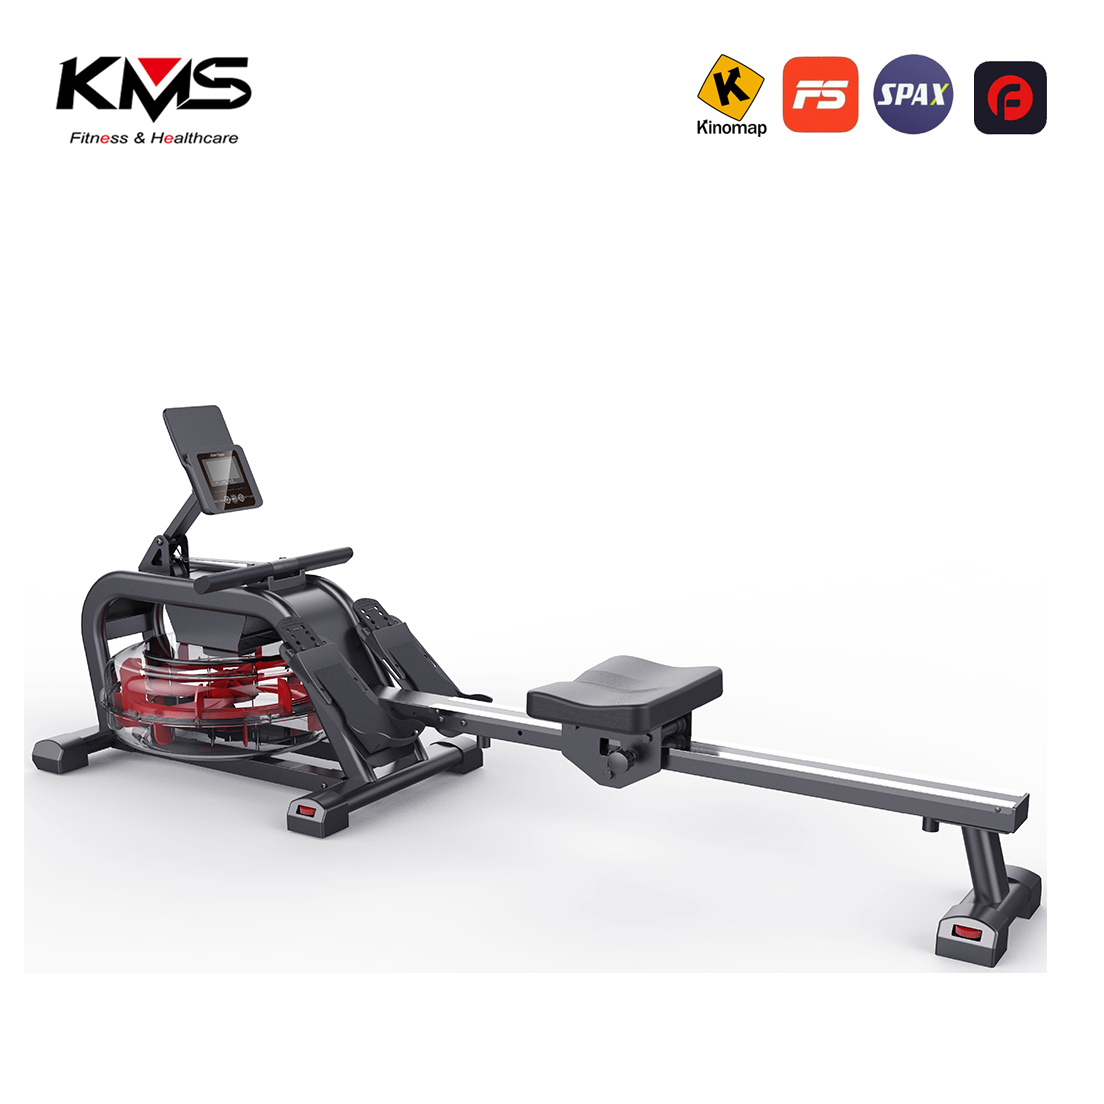 Hot New Top Water Rower Club Rowing Machine 